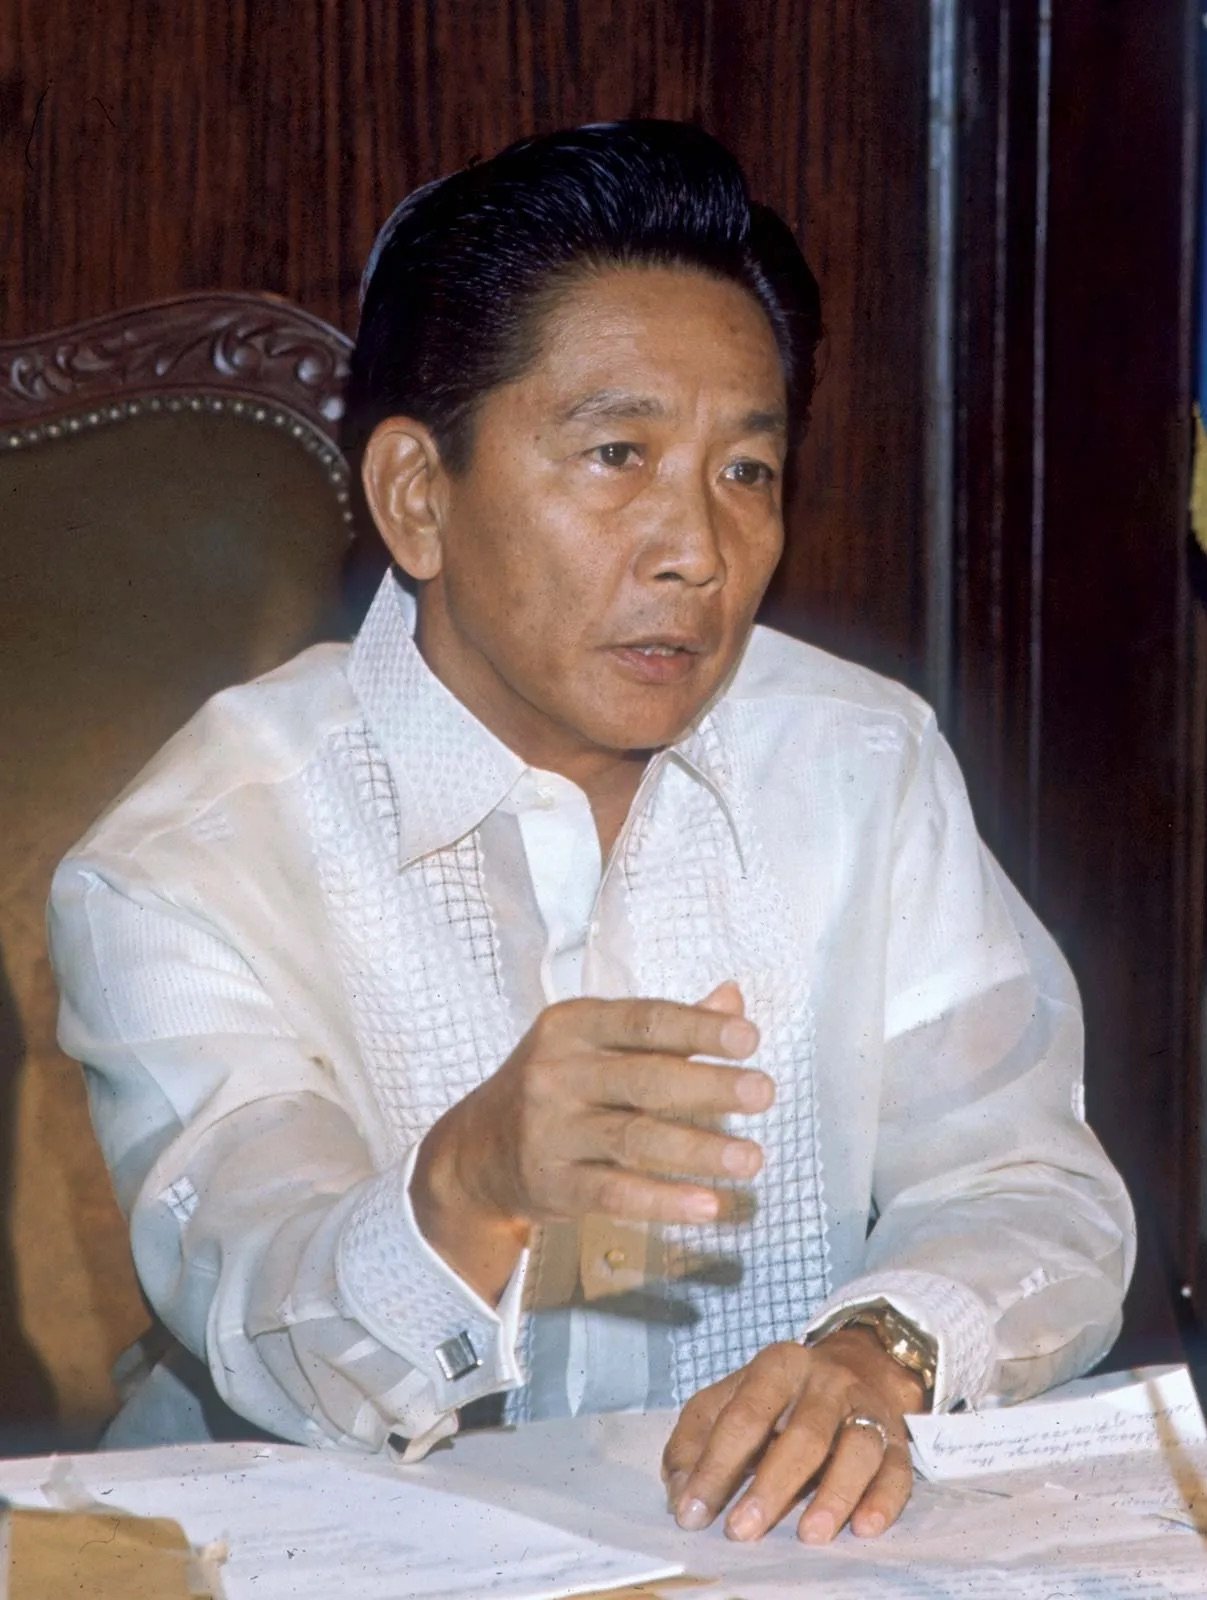 1986 all over again? Looming Political Crisis in the Philippines